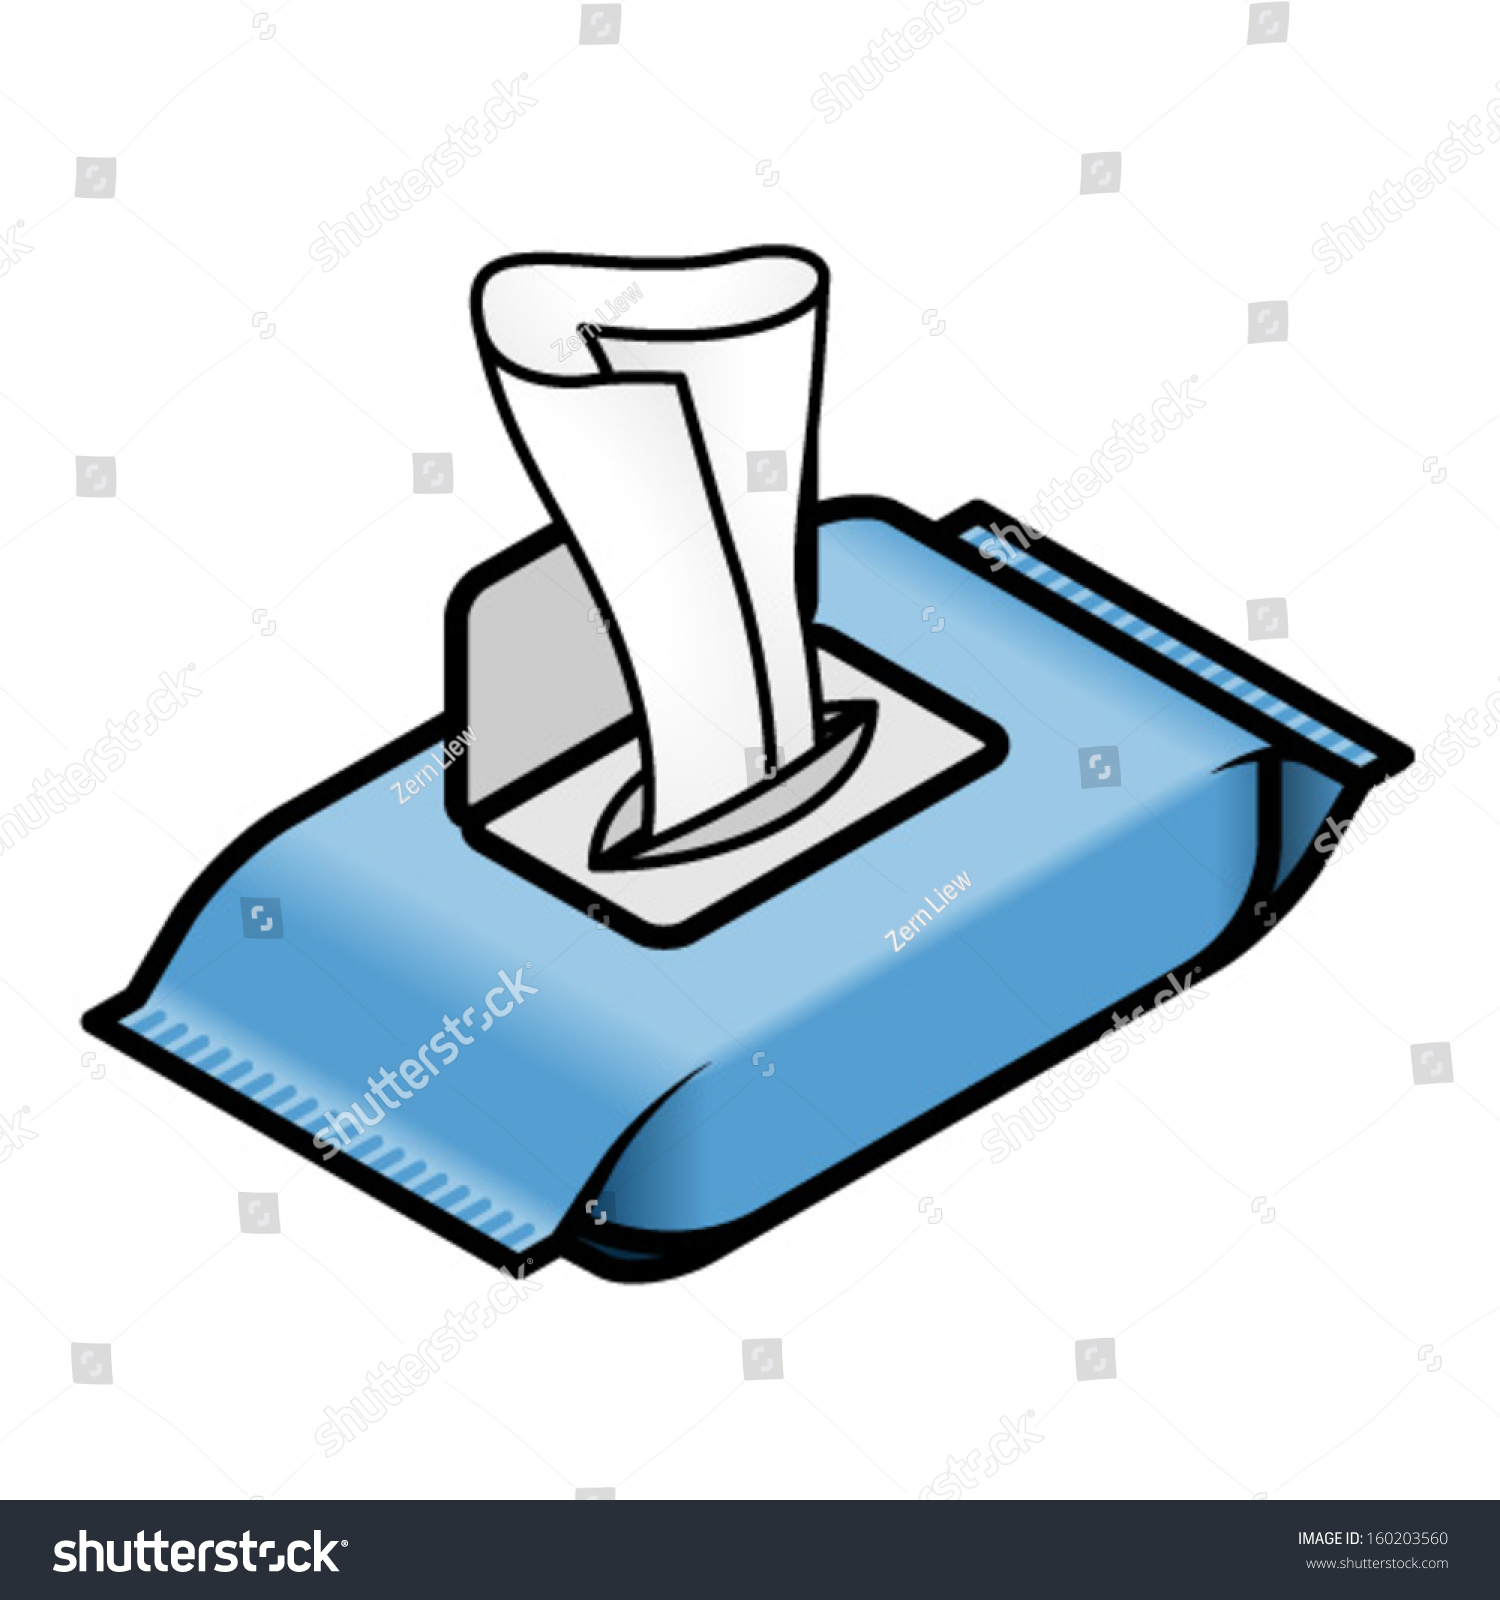 Download Open Pack Wet Wipes Tissues Stock Vector Royalty Free 160203560 Yellowimages Mockups